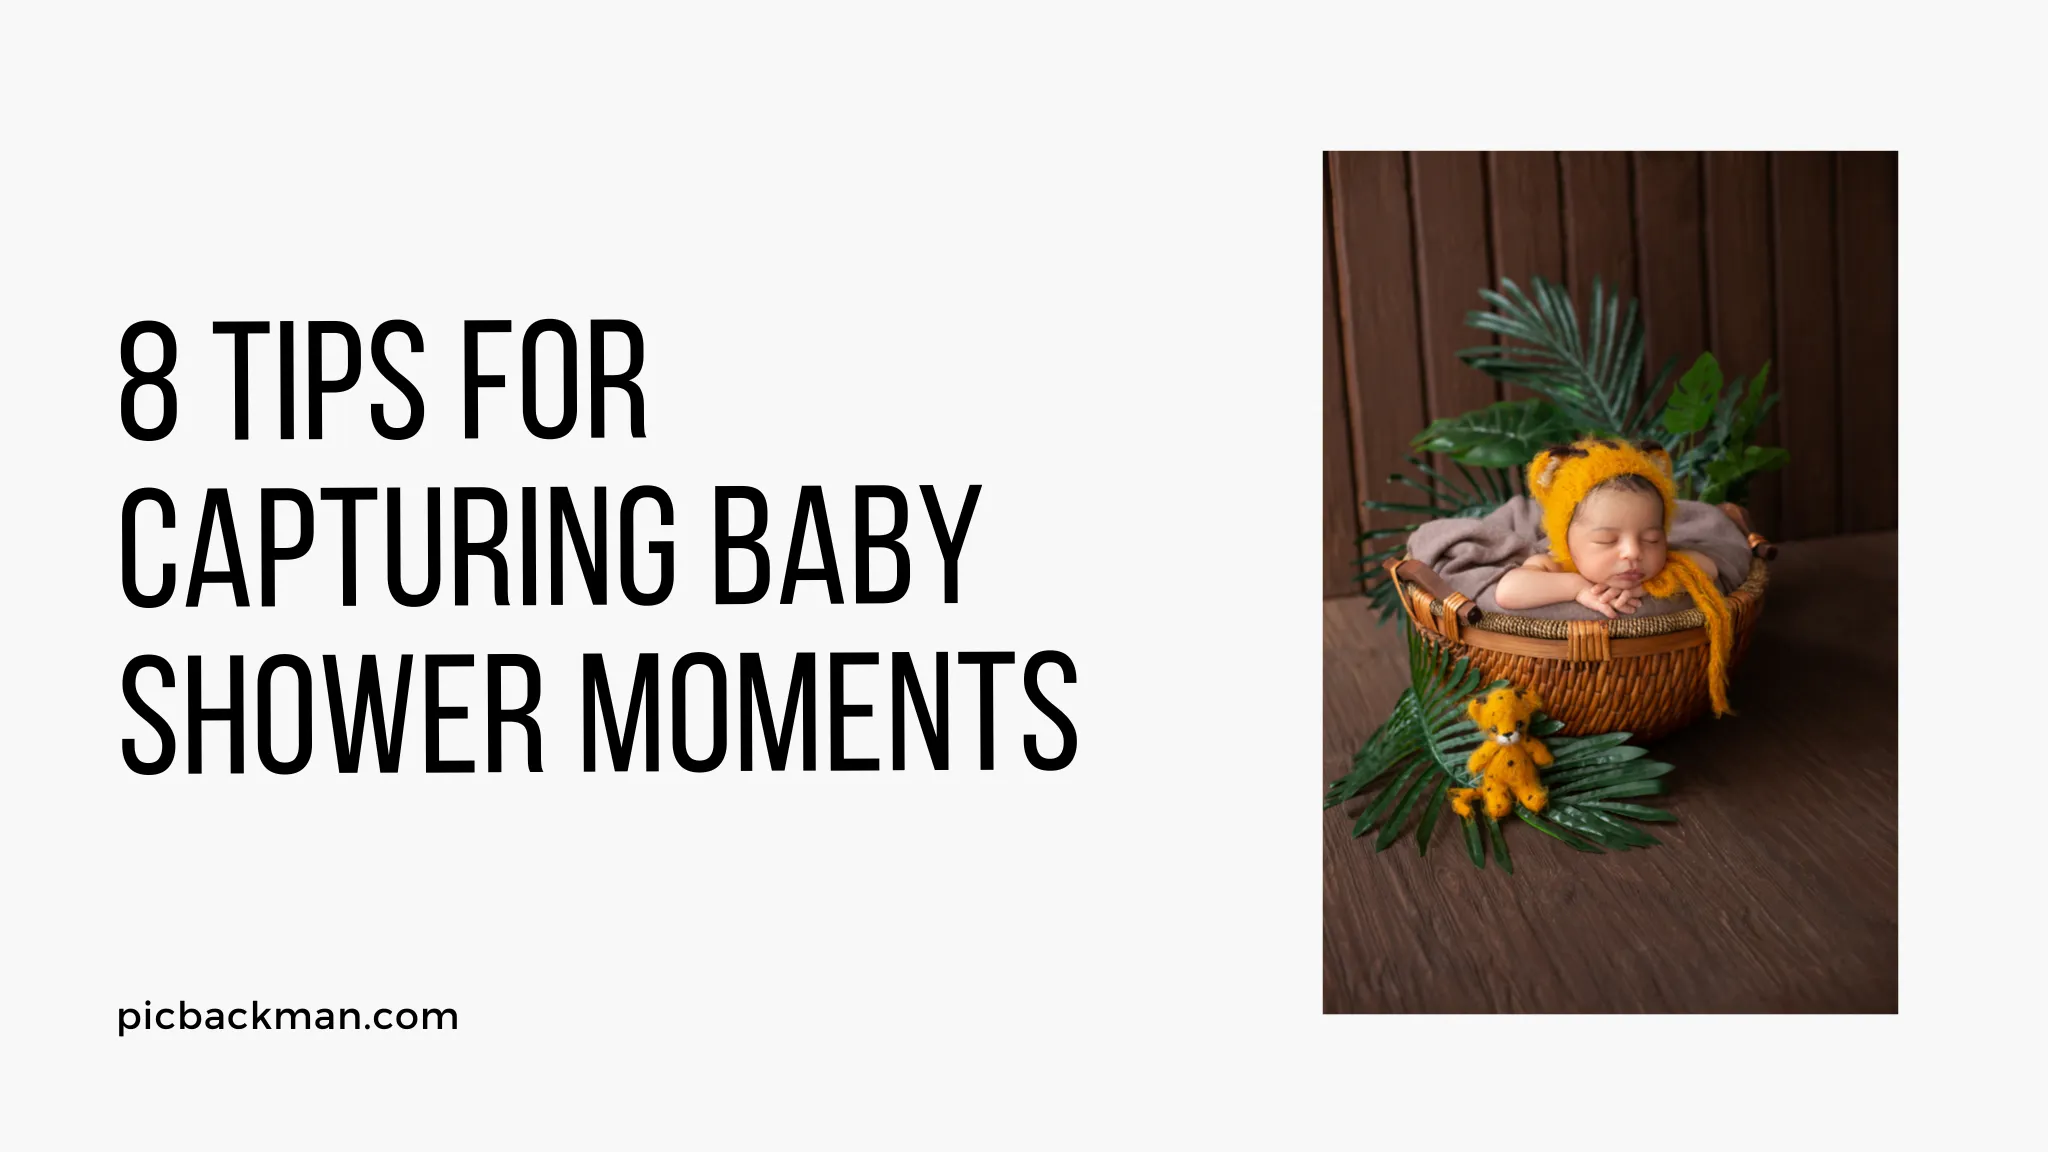 8 Tips for Capturing Baby Shower Moments